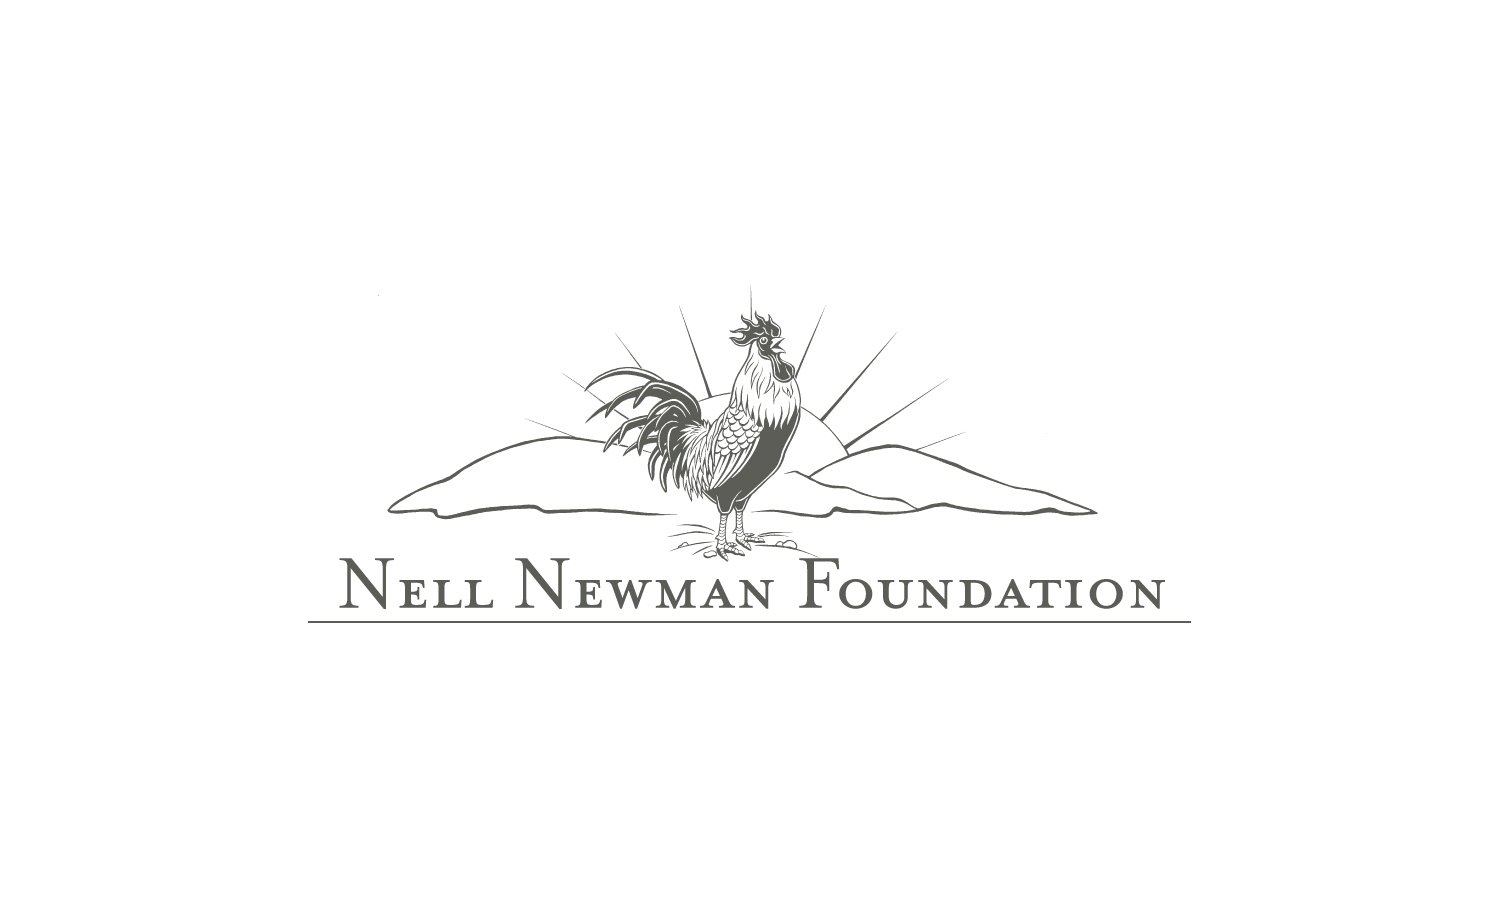 The Nell Newman Foundation